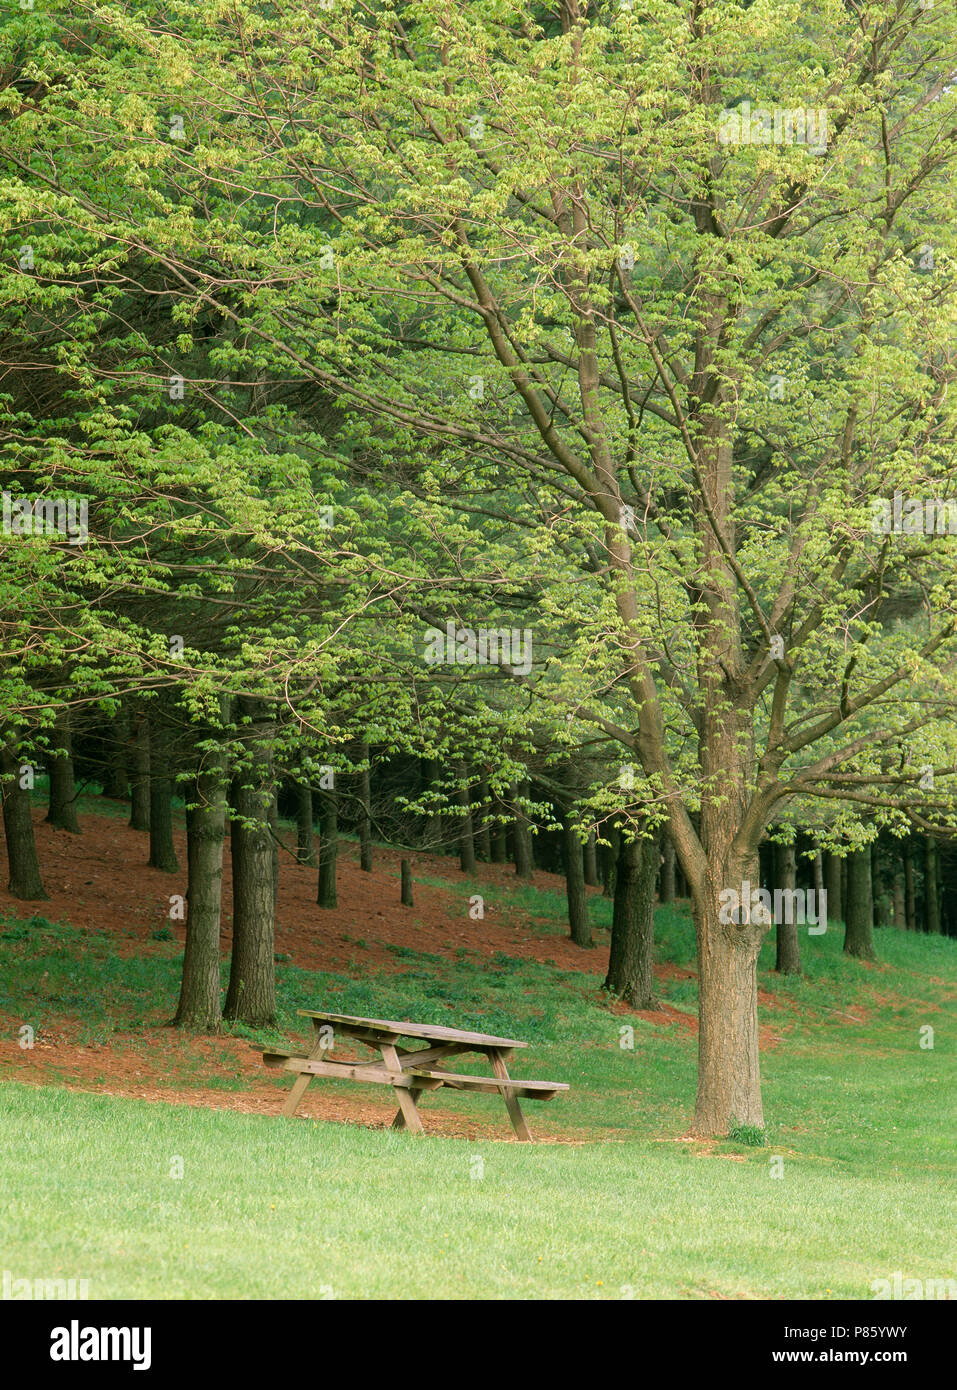 SUGAR MAPLE IN SPRING (ACER SACCHARUM) WITH PICNIC TABLE / LANCASTER COUNTY, PENNSYLVANIA [FOUR SEASON SERIES] Stock Photo